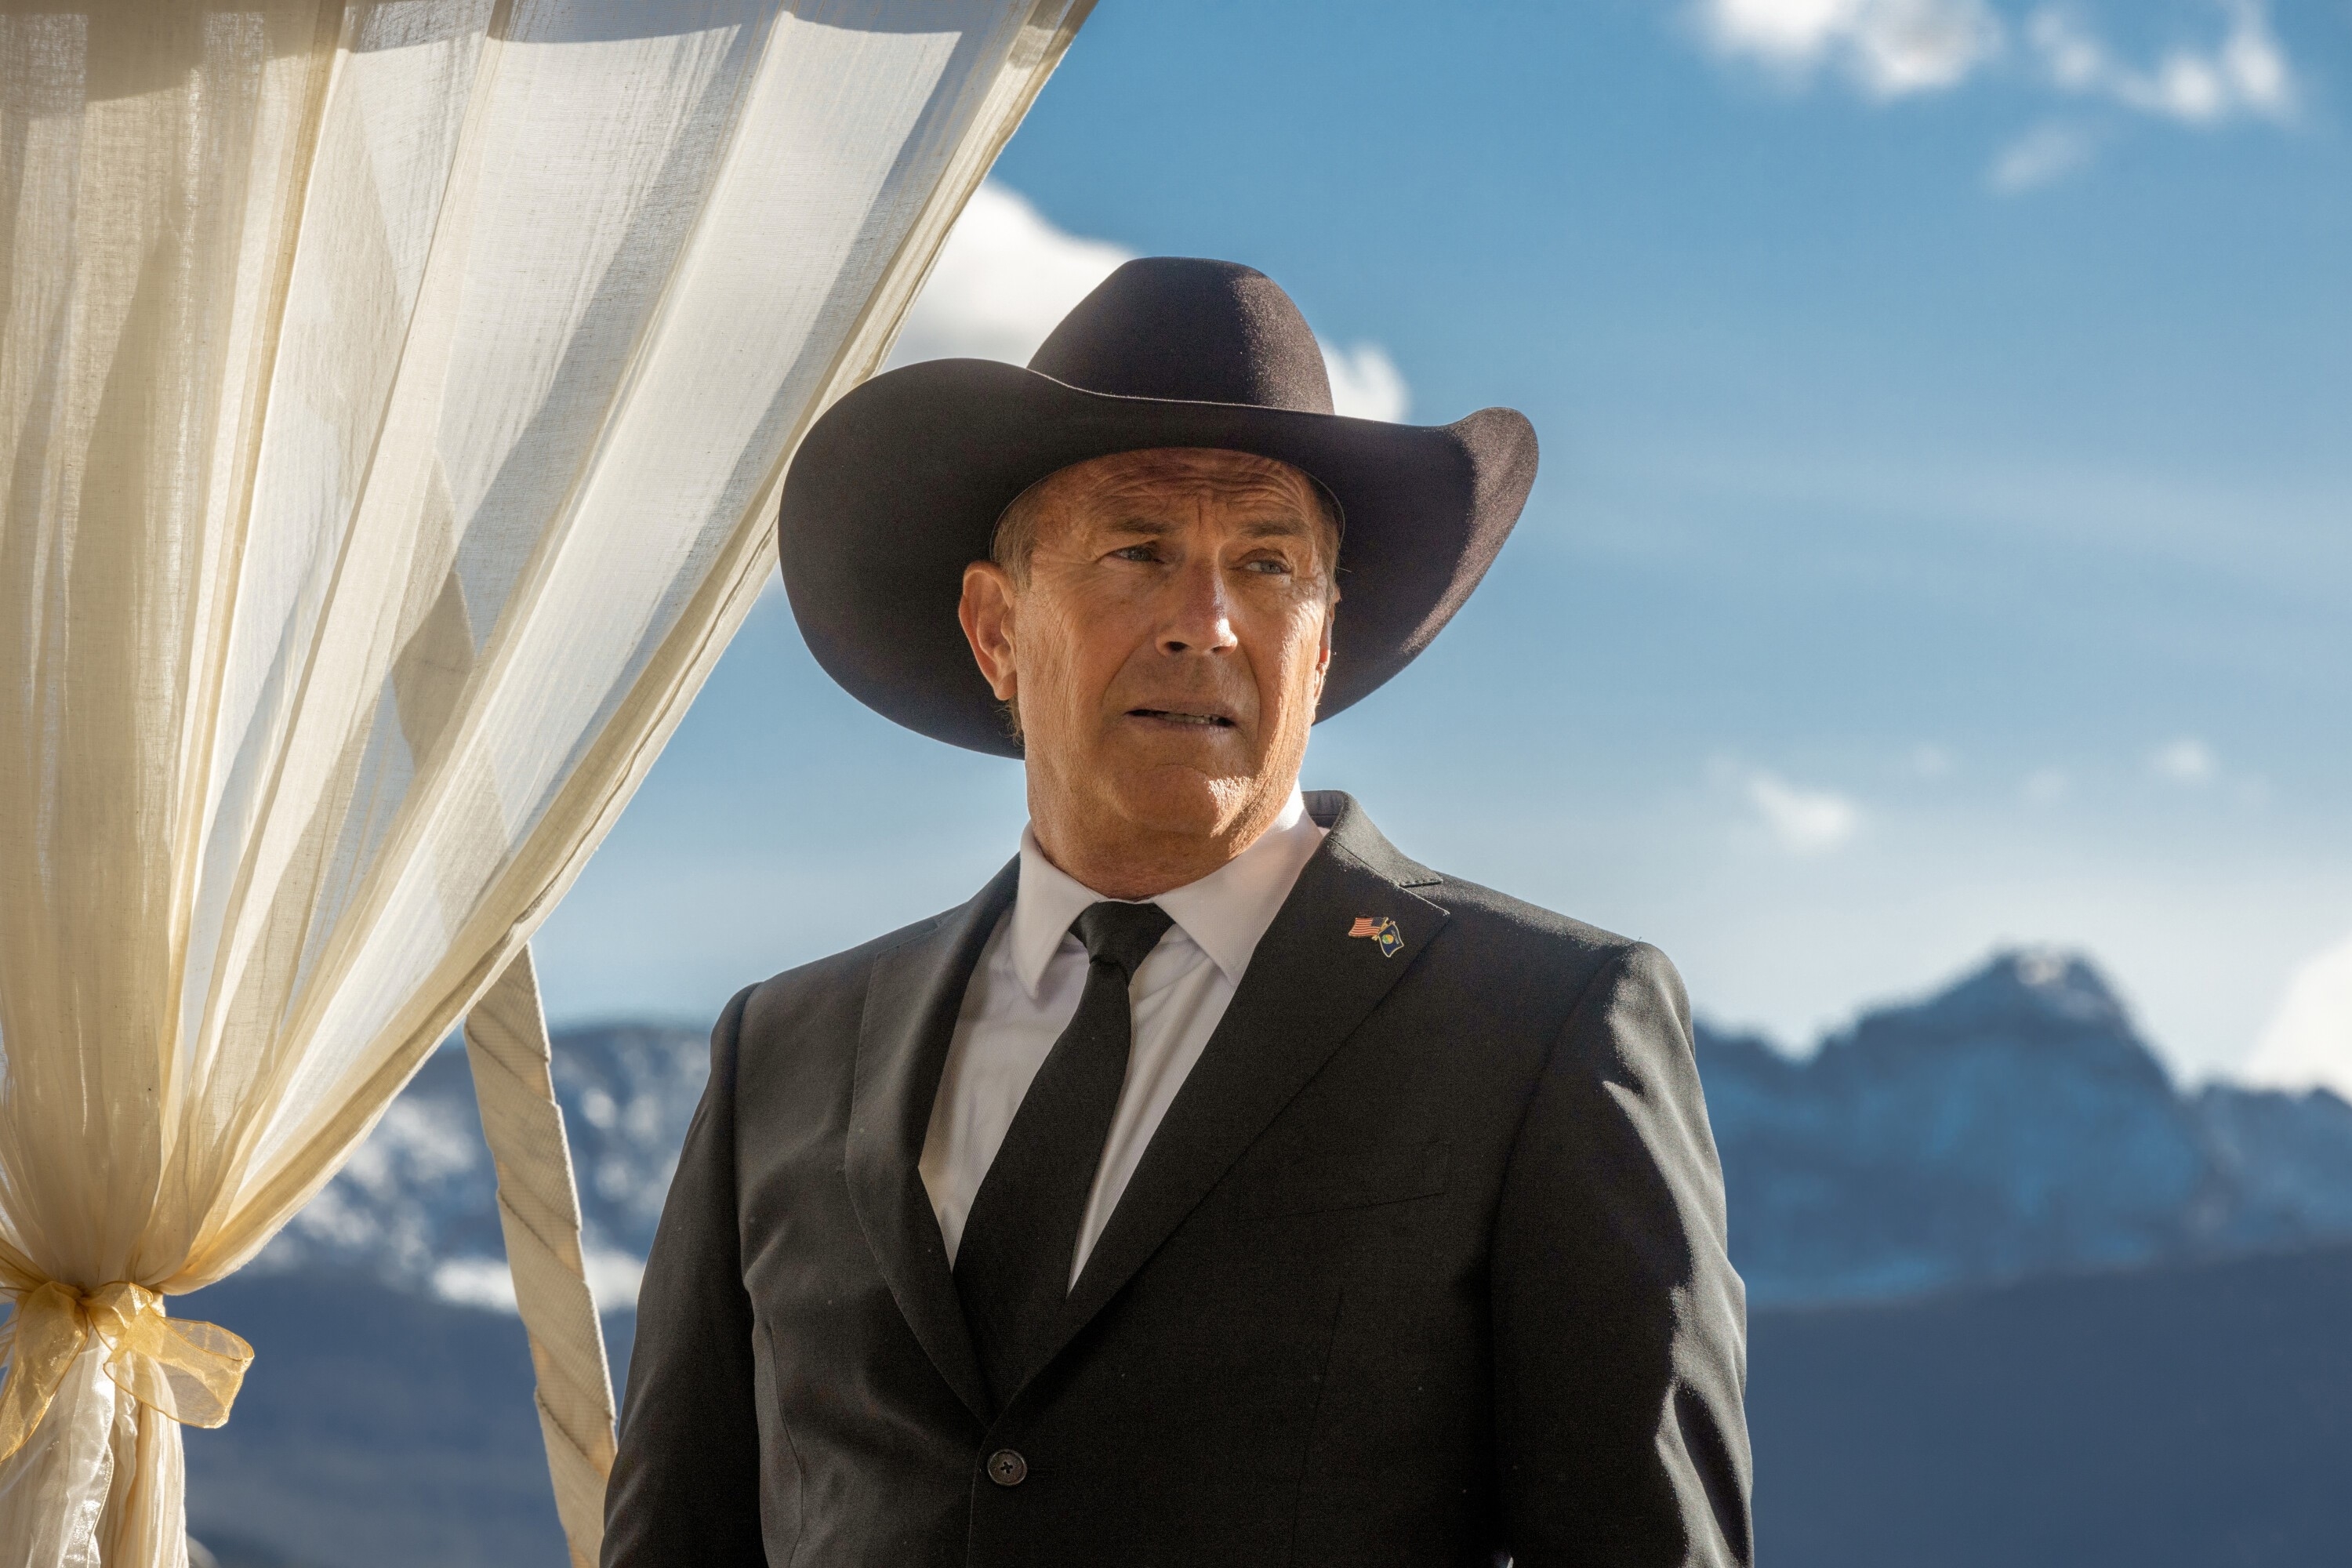 Kevin Costner in character as John Dutton from &quot;Yellowstone,&quot; wearing a suit and cowboy hat with mountains in the background